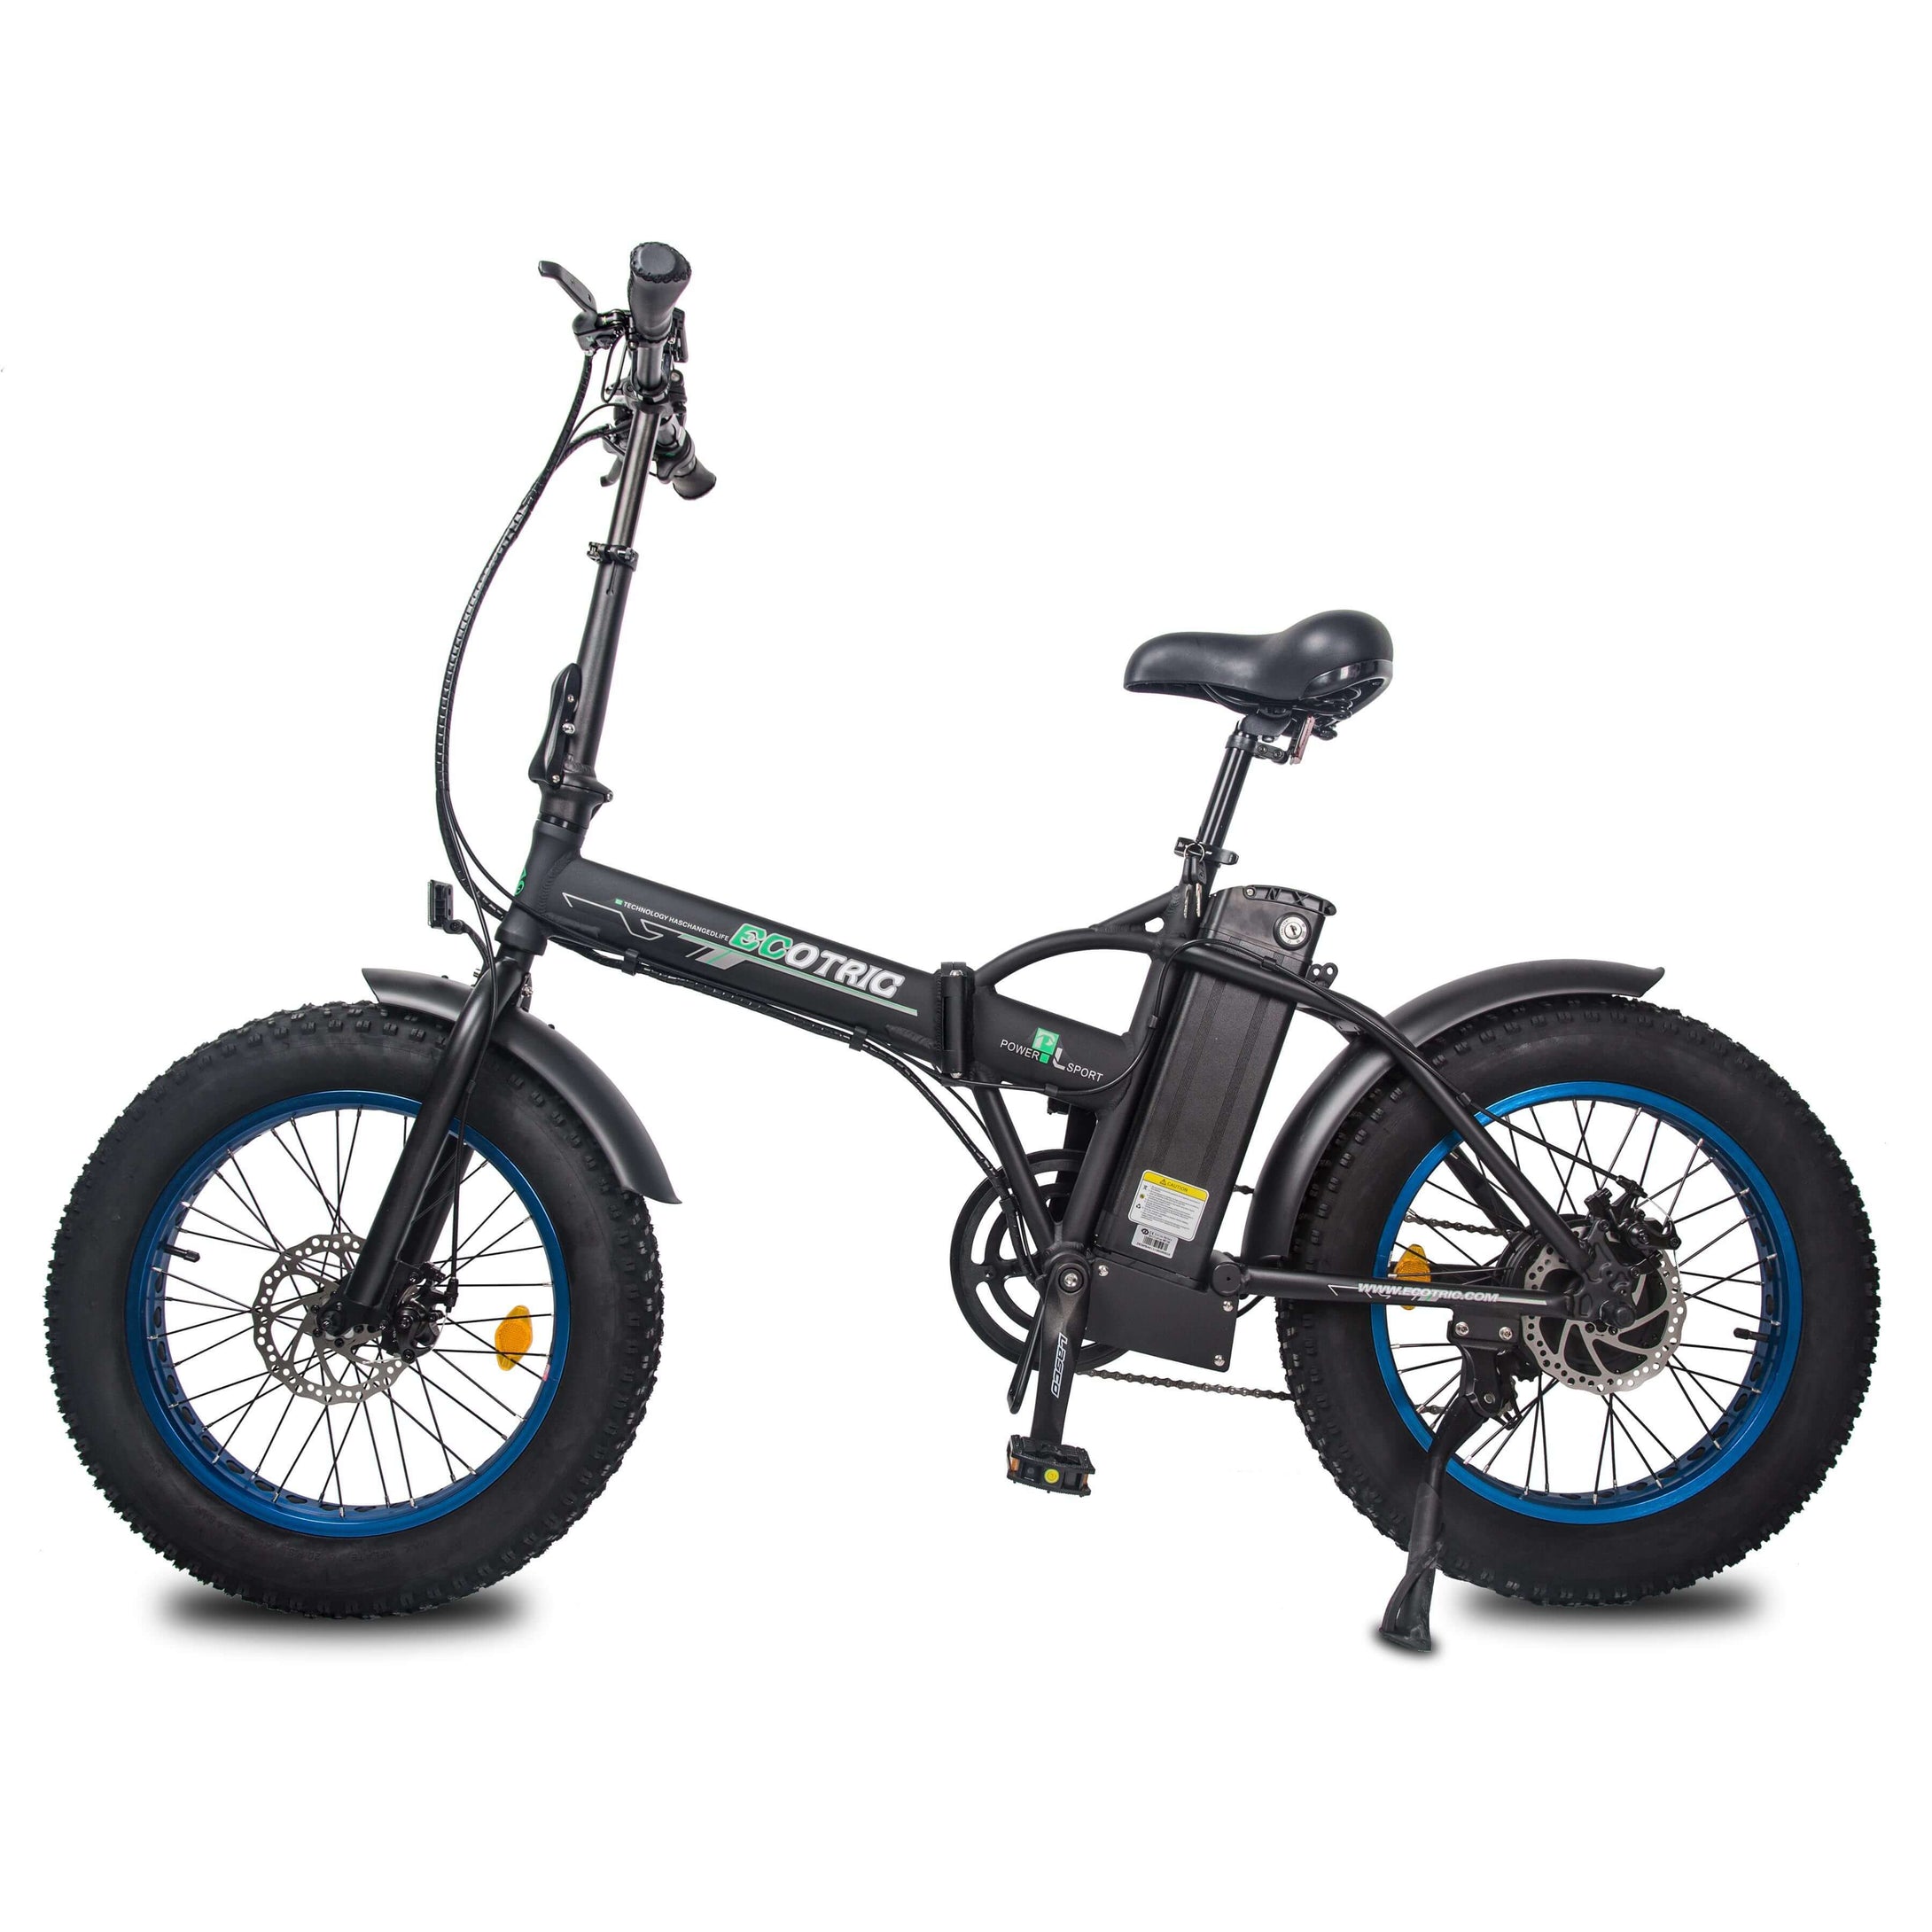 Ecotric 48V Fat Tire Portable and Folding Electric Bike with LCD display